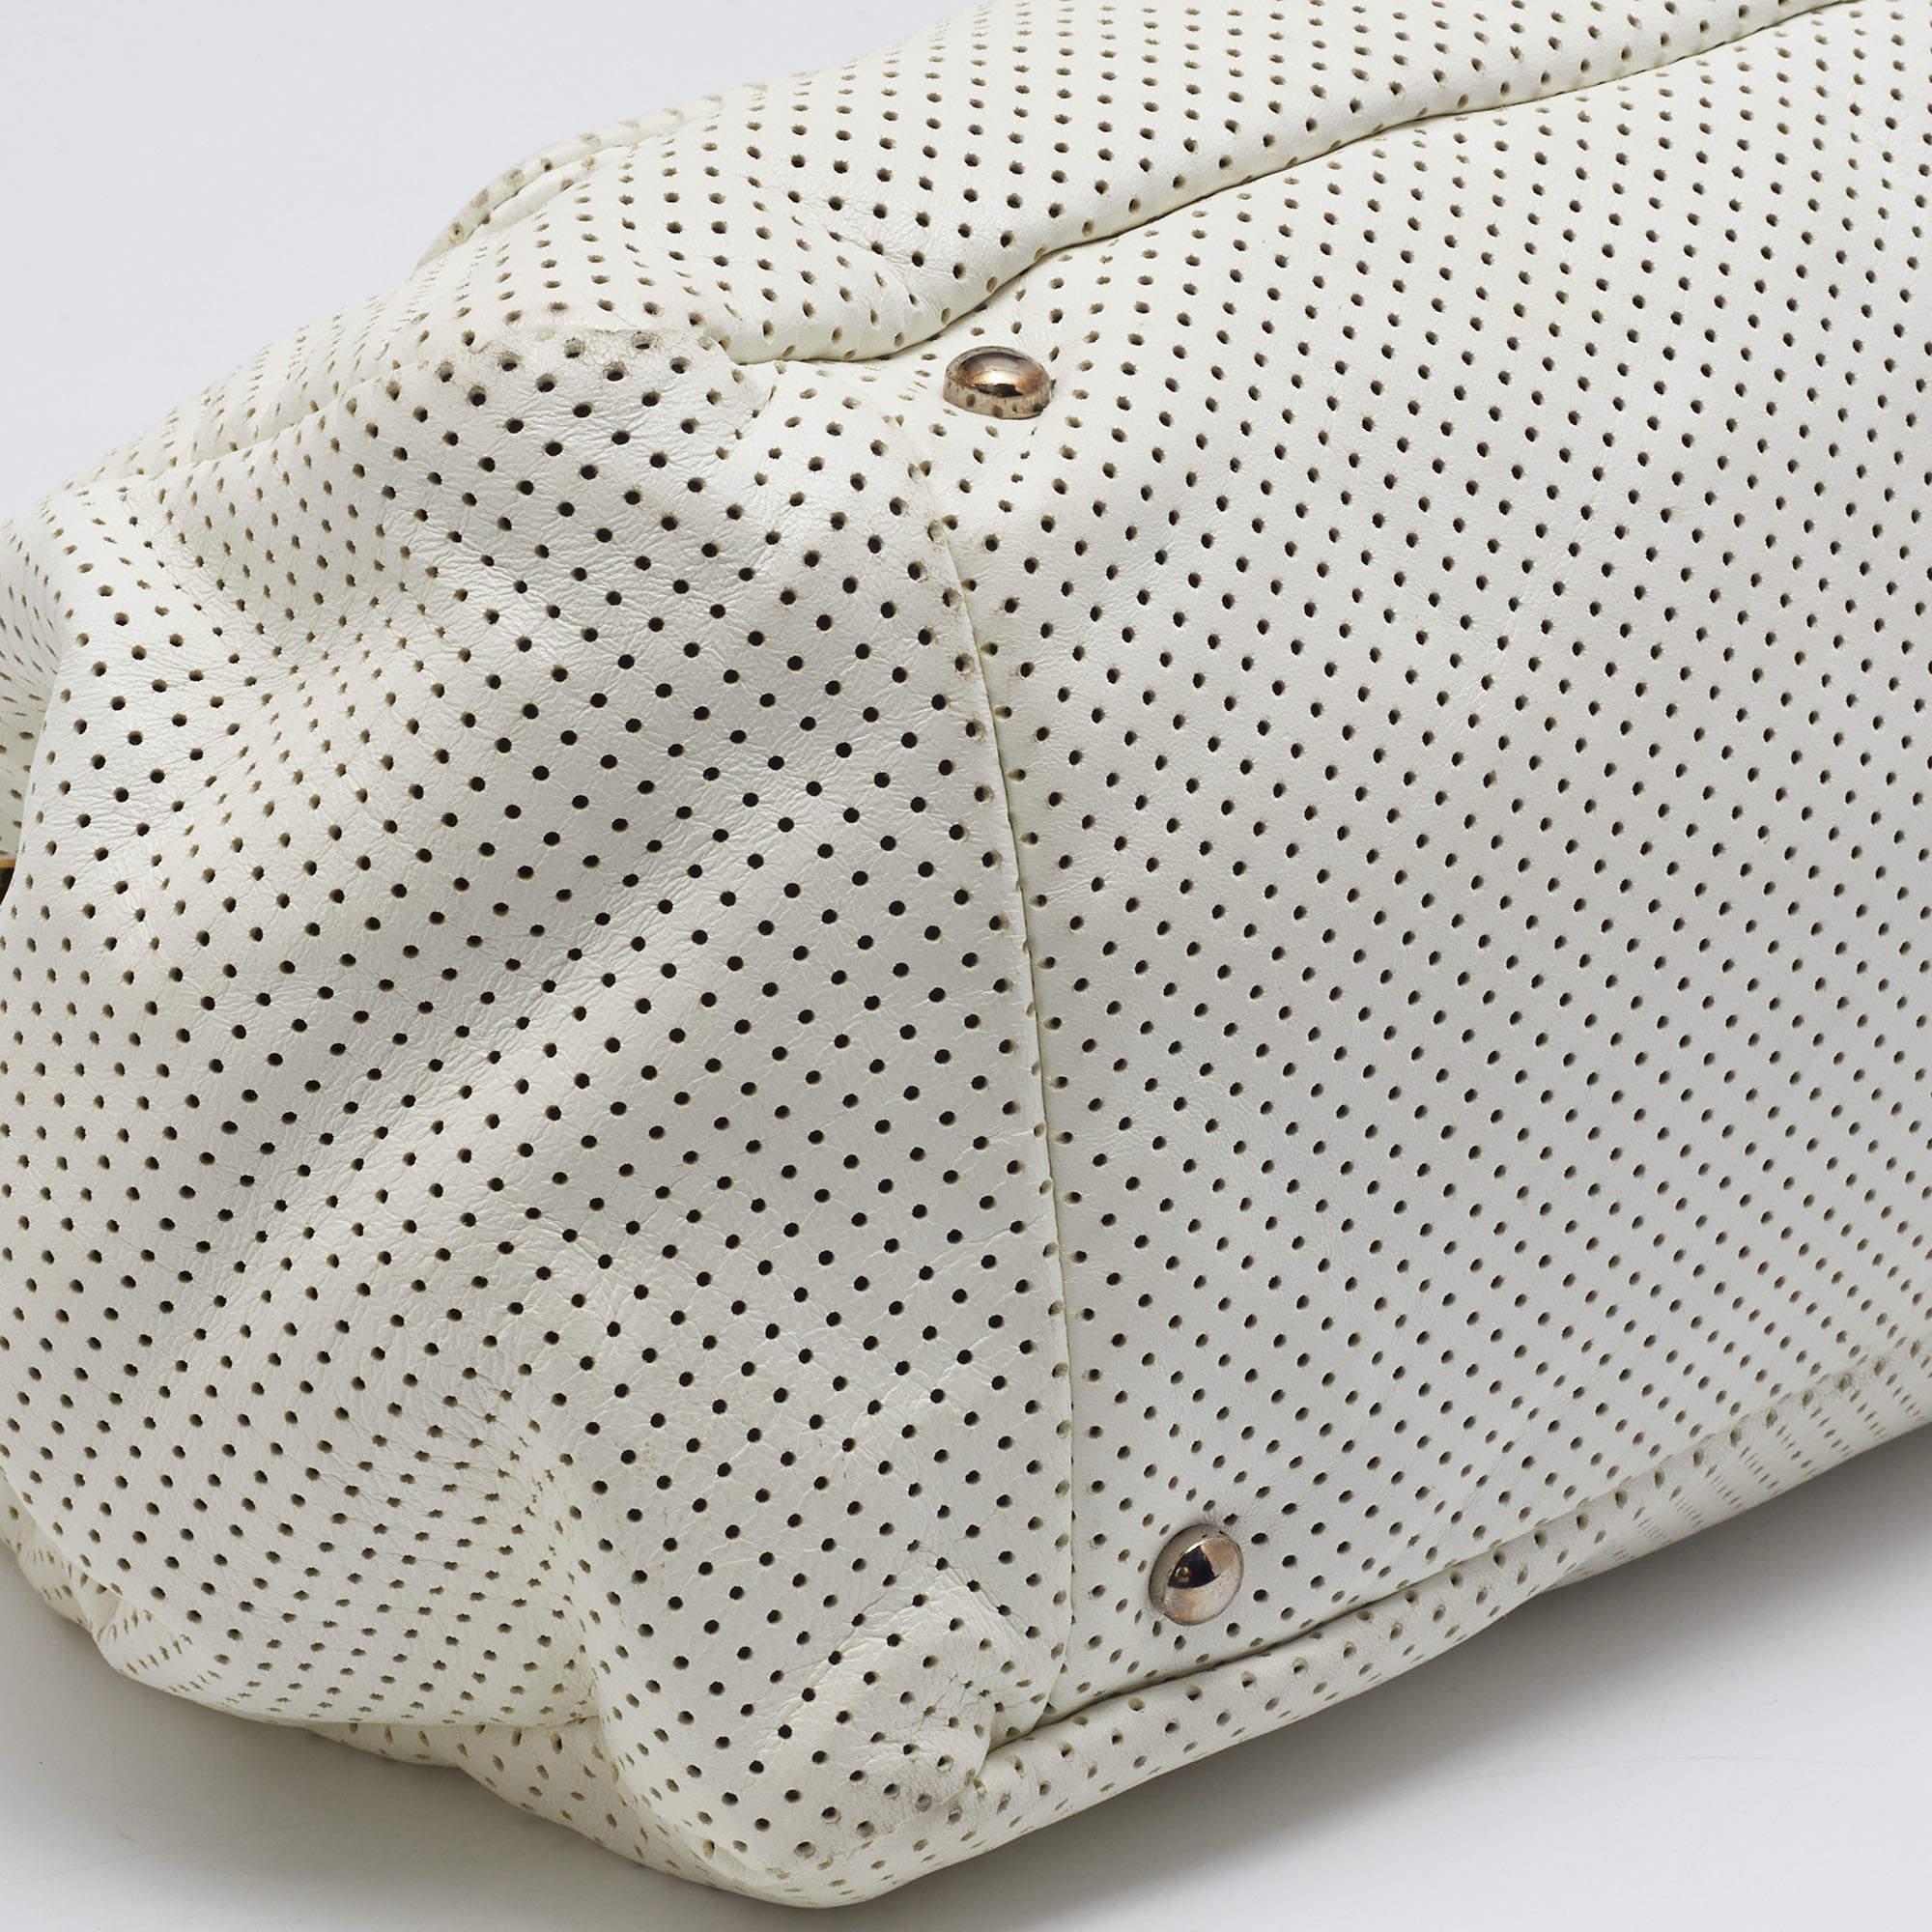 Chanel White Perforated Leather Accordion Flap Bag 4